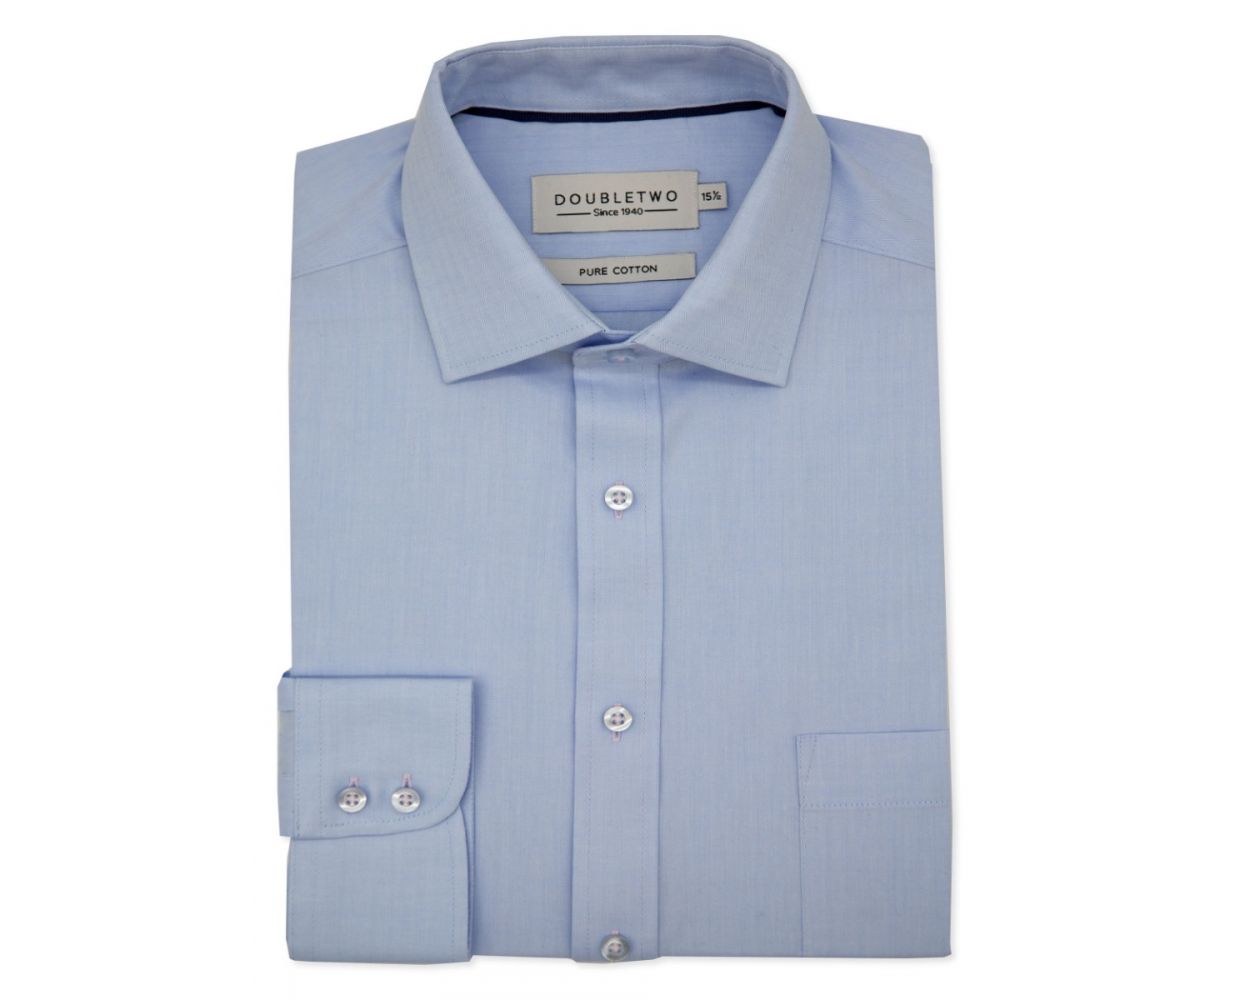 Double Two Oxford Shirt - Durkins